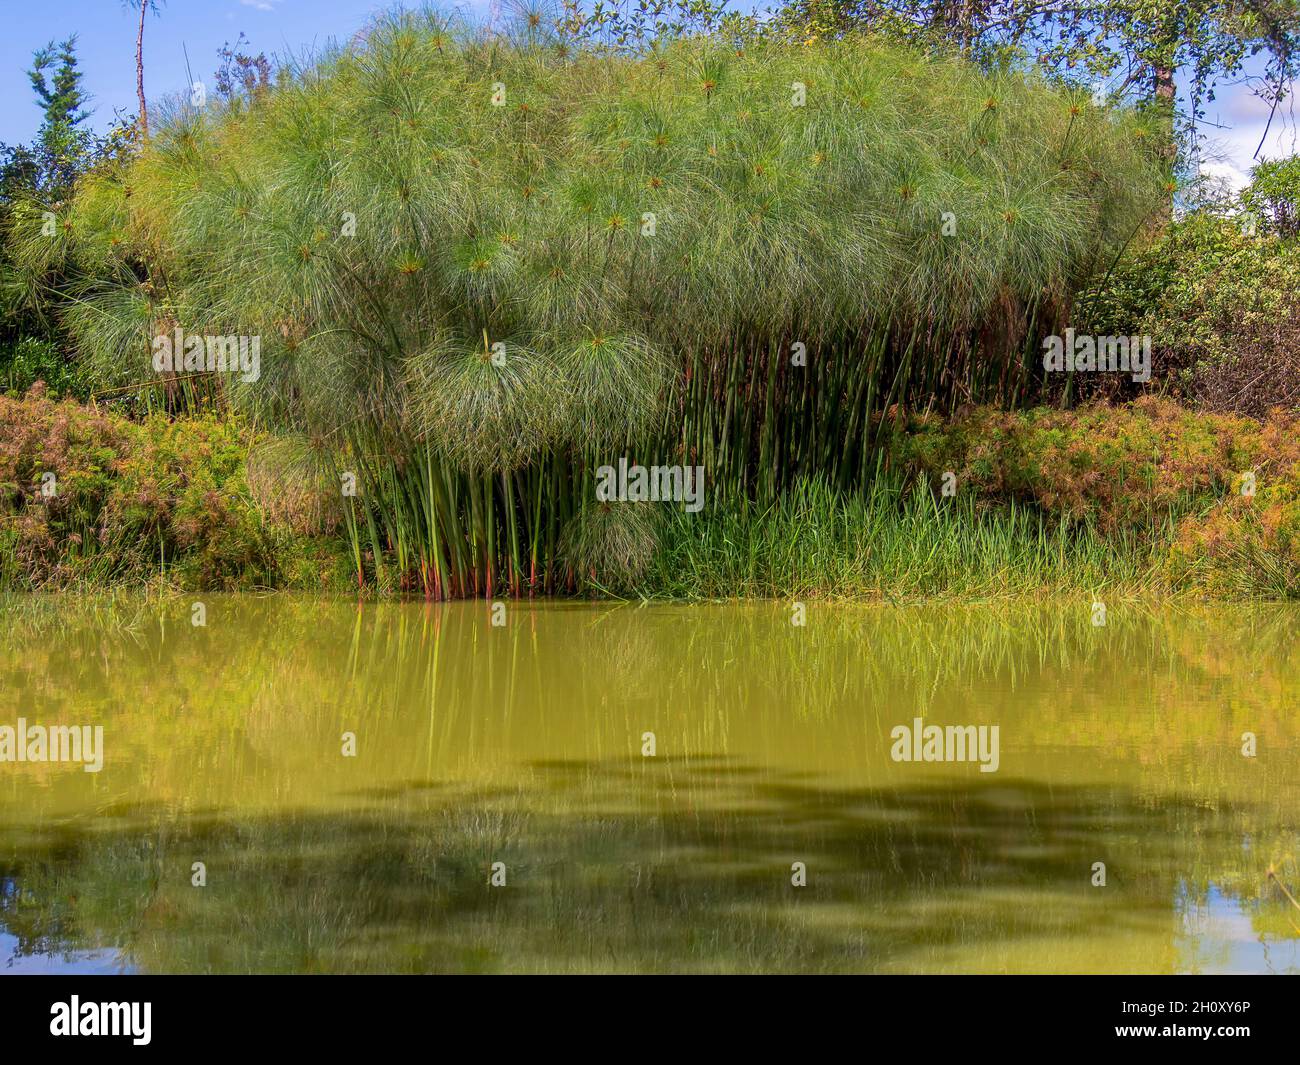 A forest of papyrus plants in a lake at sunrise, near the town of Villa de Leyva in central Colombia. Stock Photo